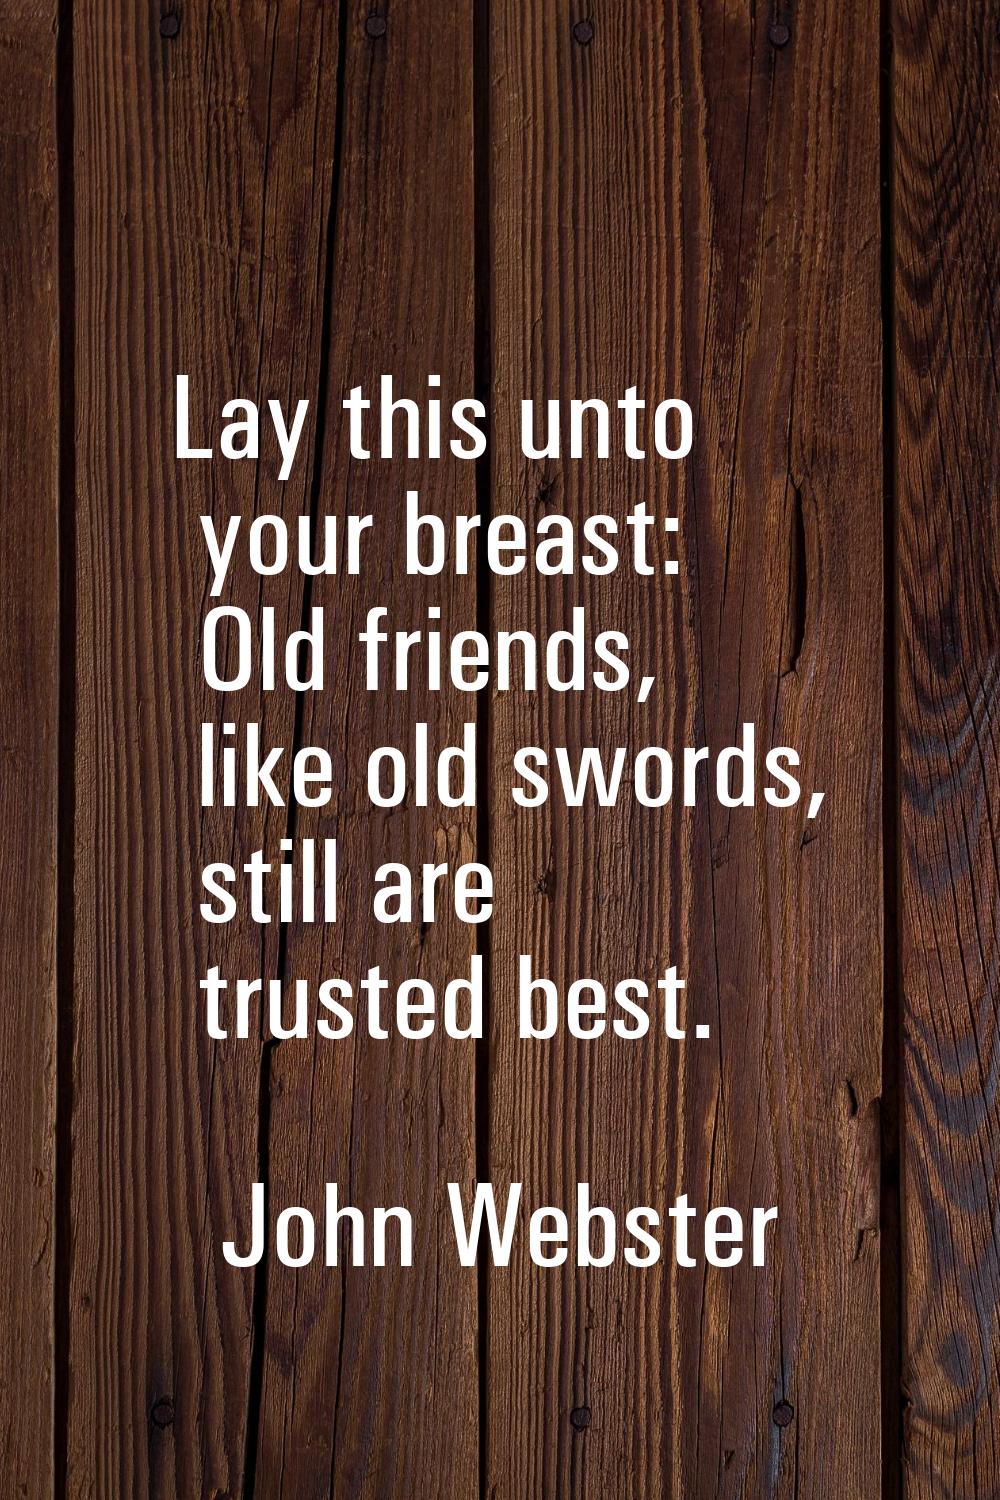 Lay this unto your breast: Old friends, like old swords, still are trusted best.